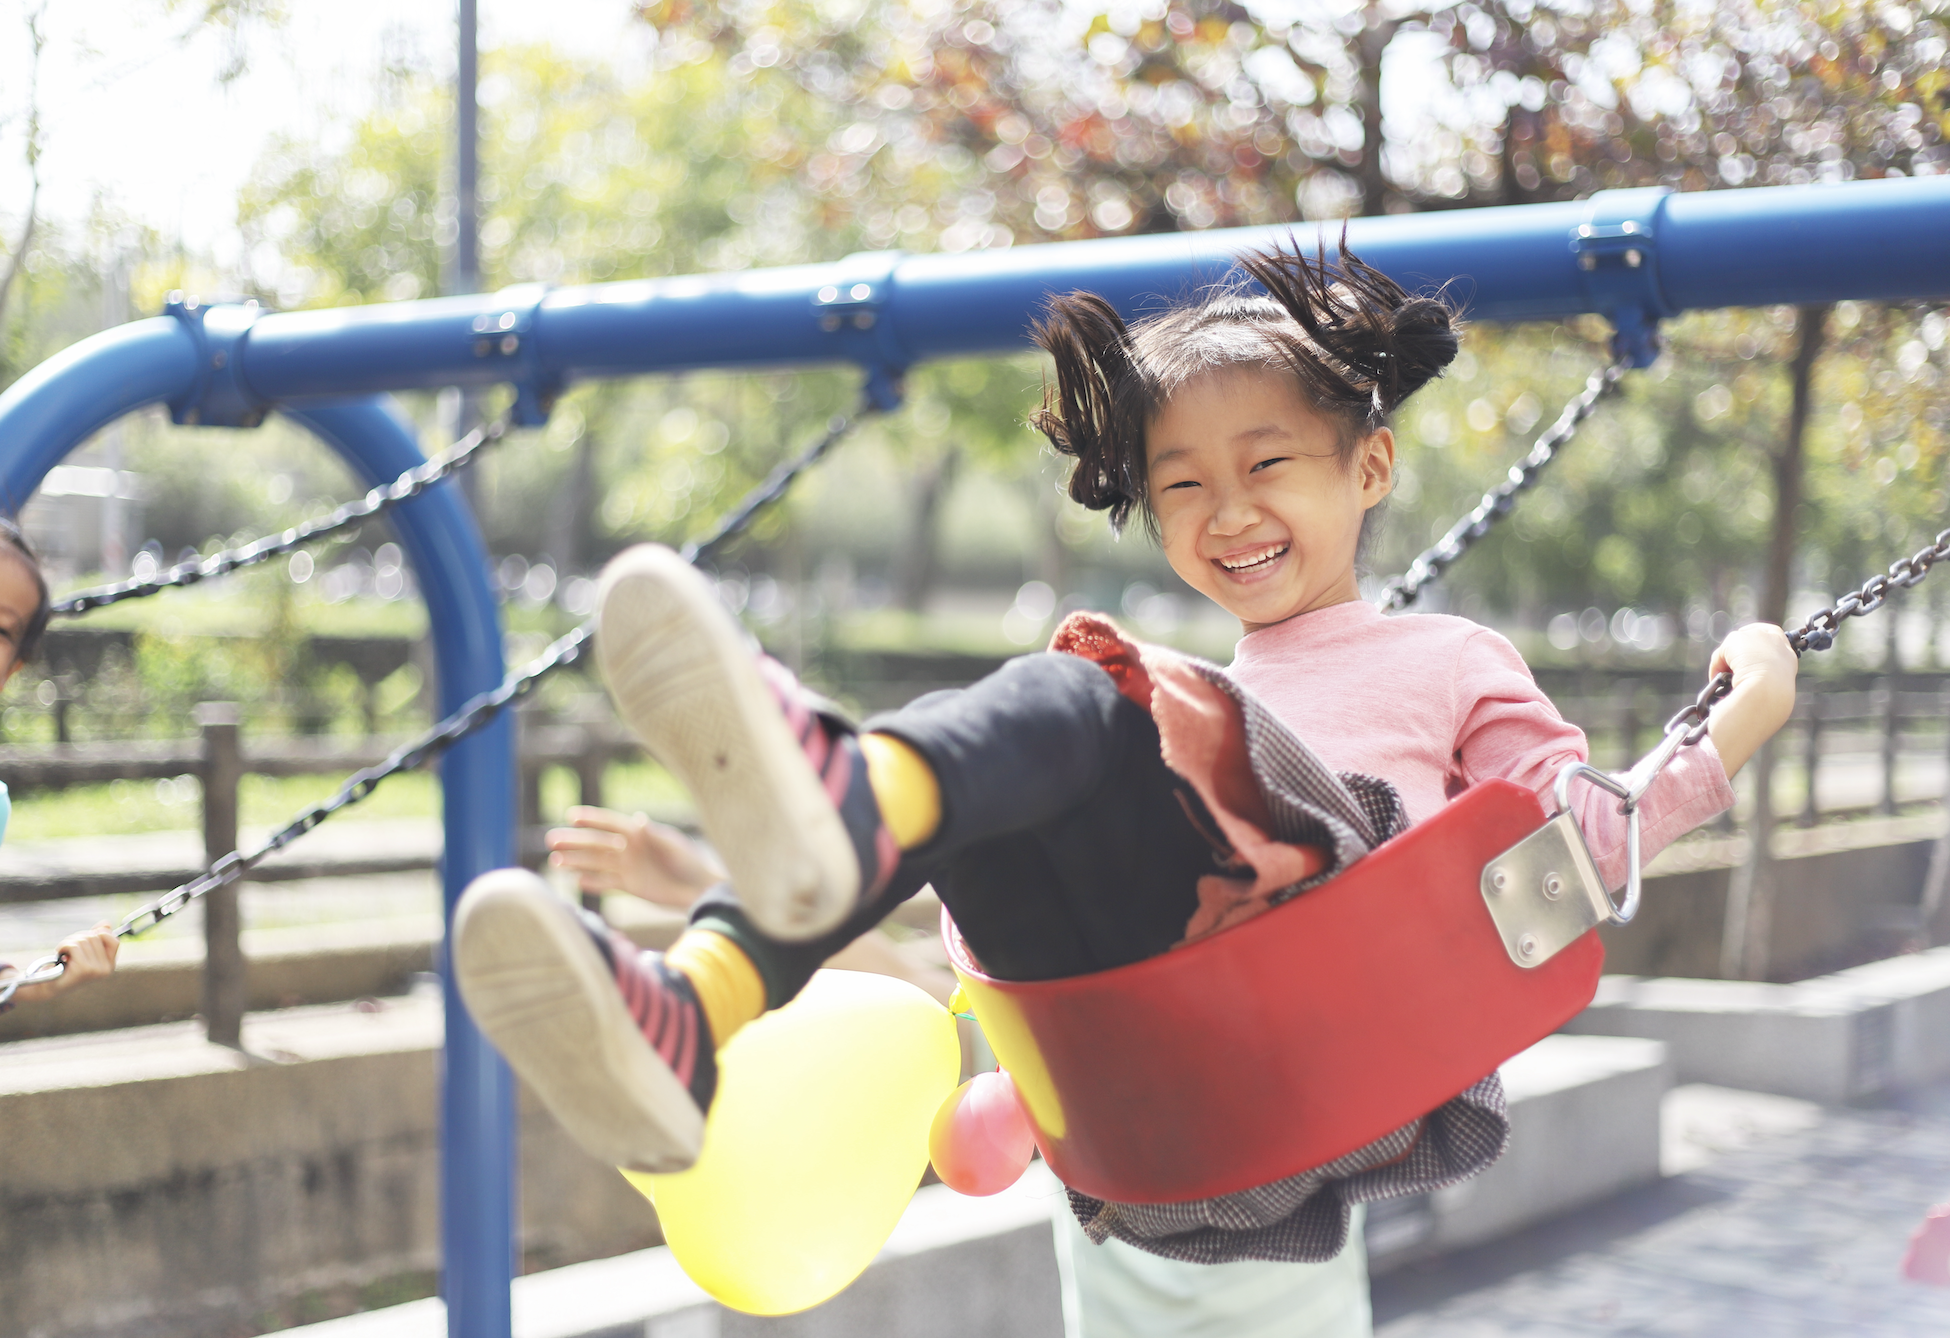 A young girl laughing and joyfully swinging on a playground swing, holding a balloon. Trees and park benches can be seen in the background